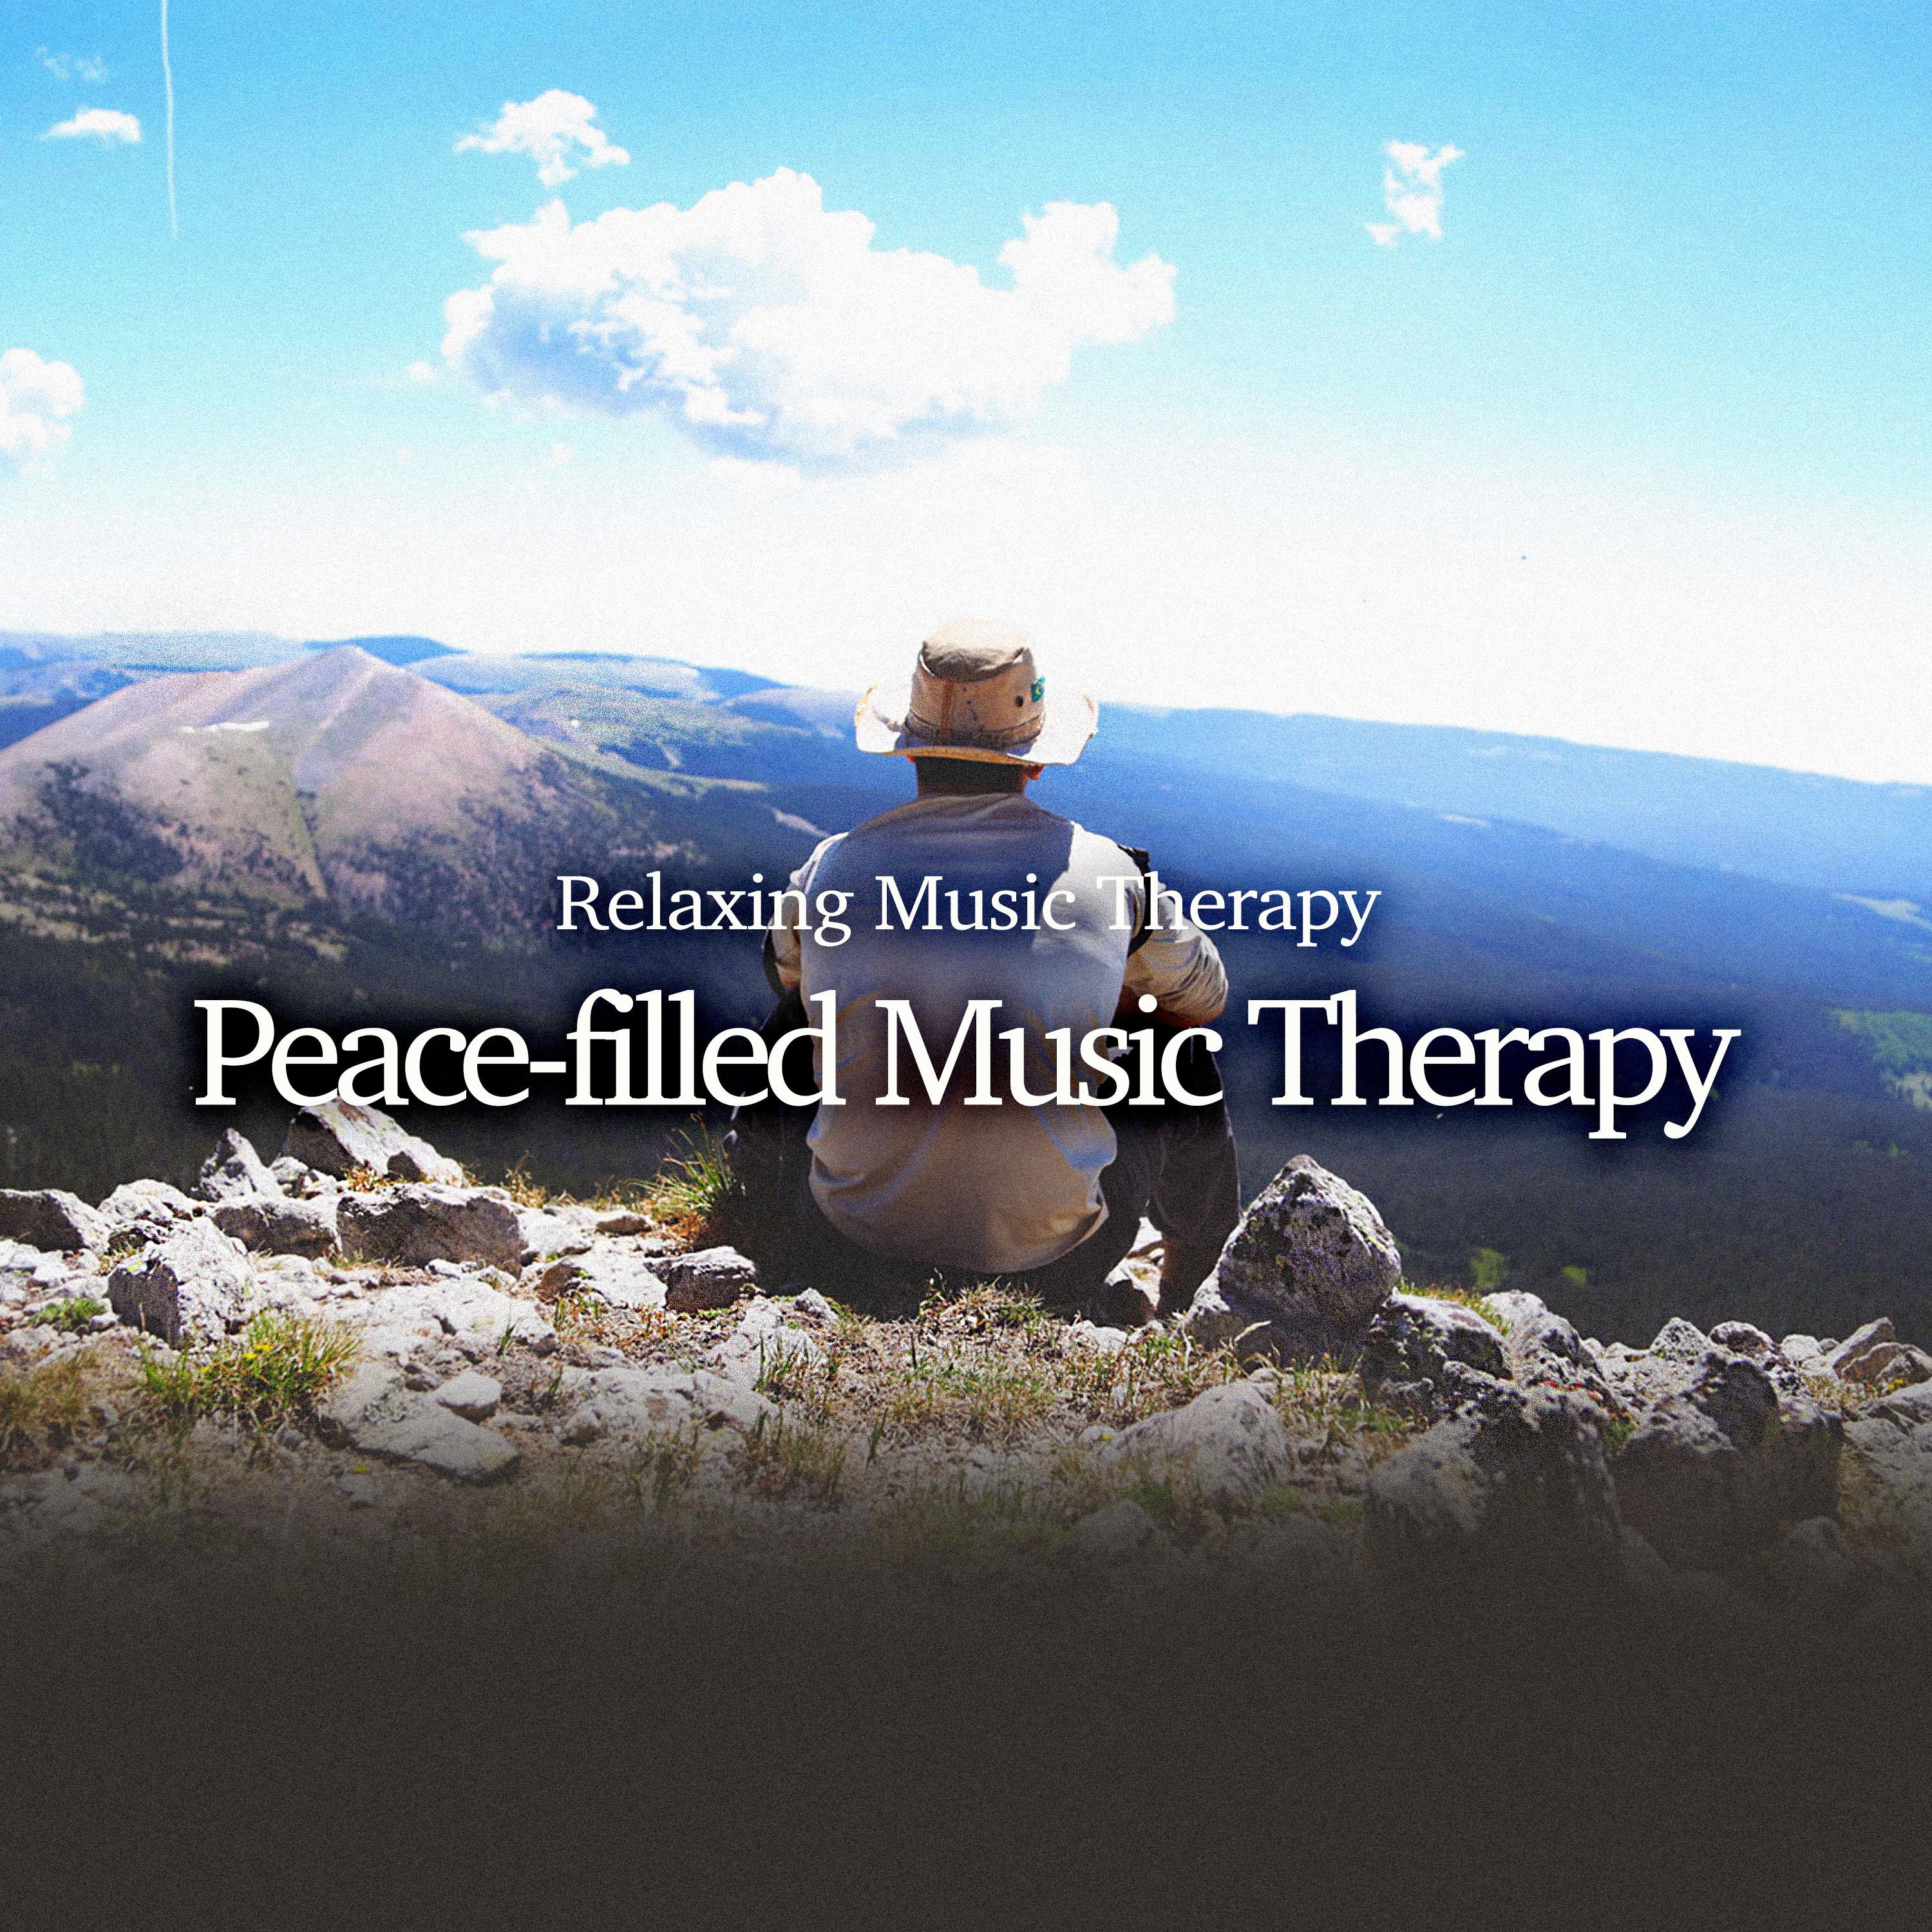 Peace-filled Music Therapy